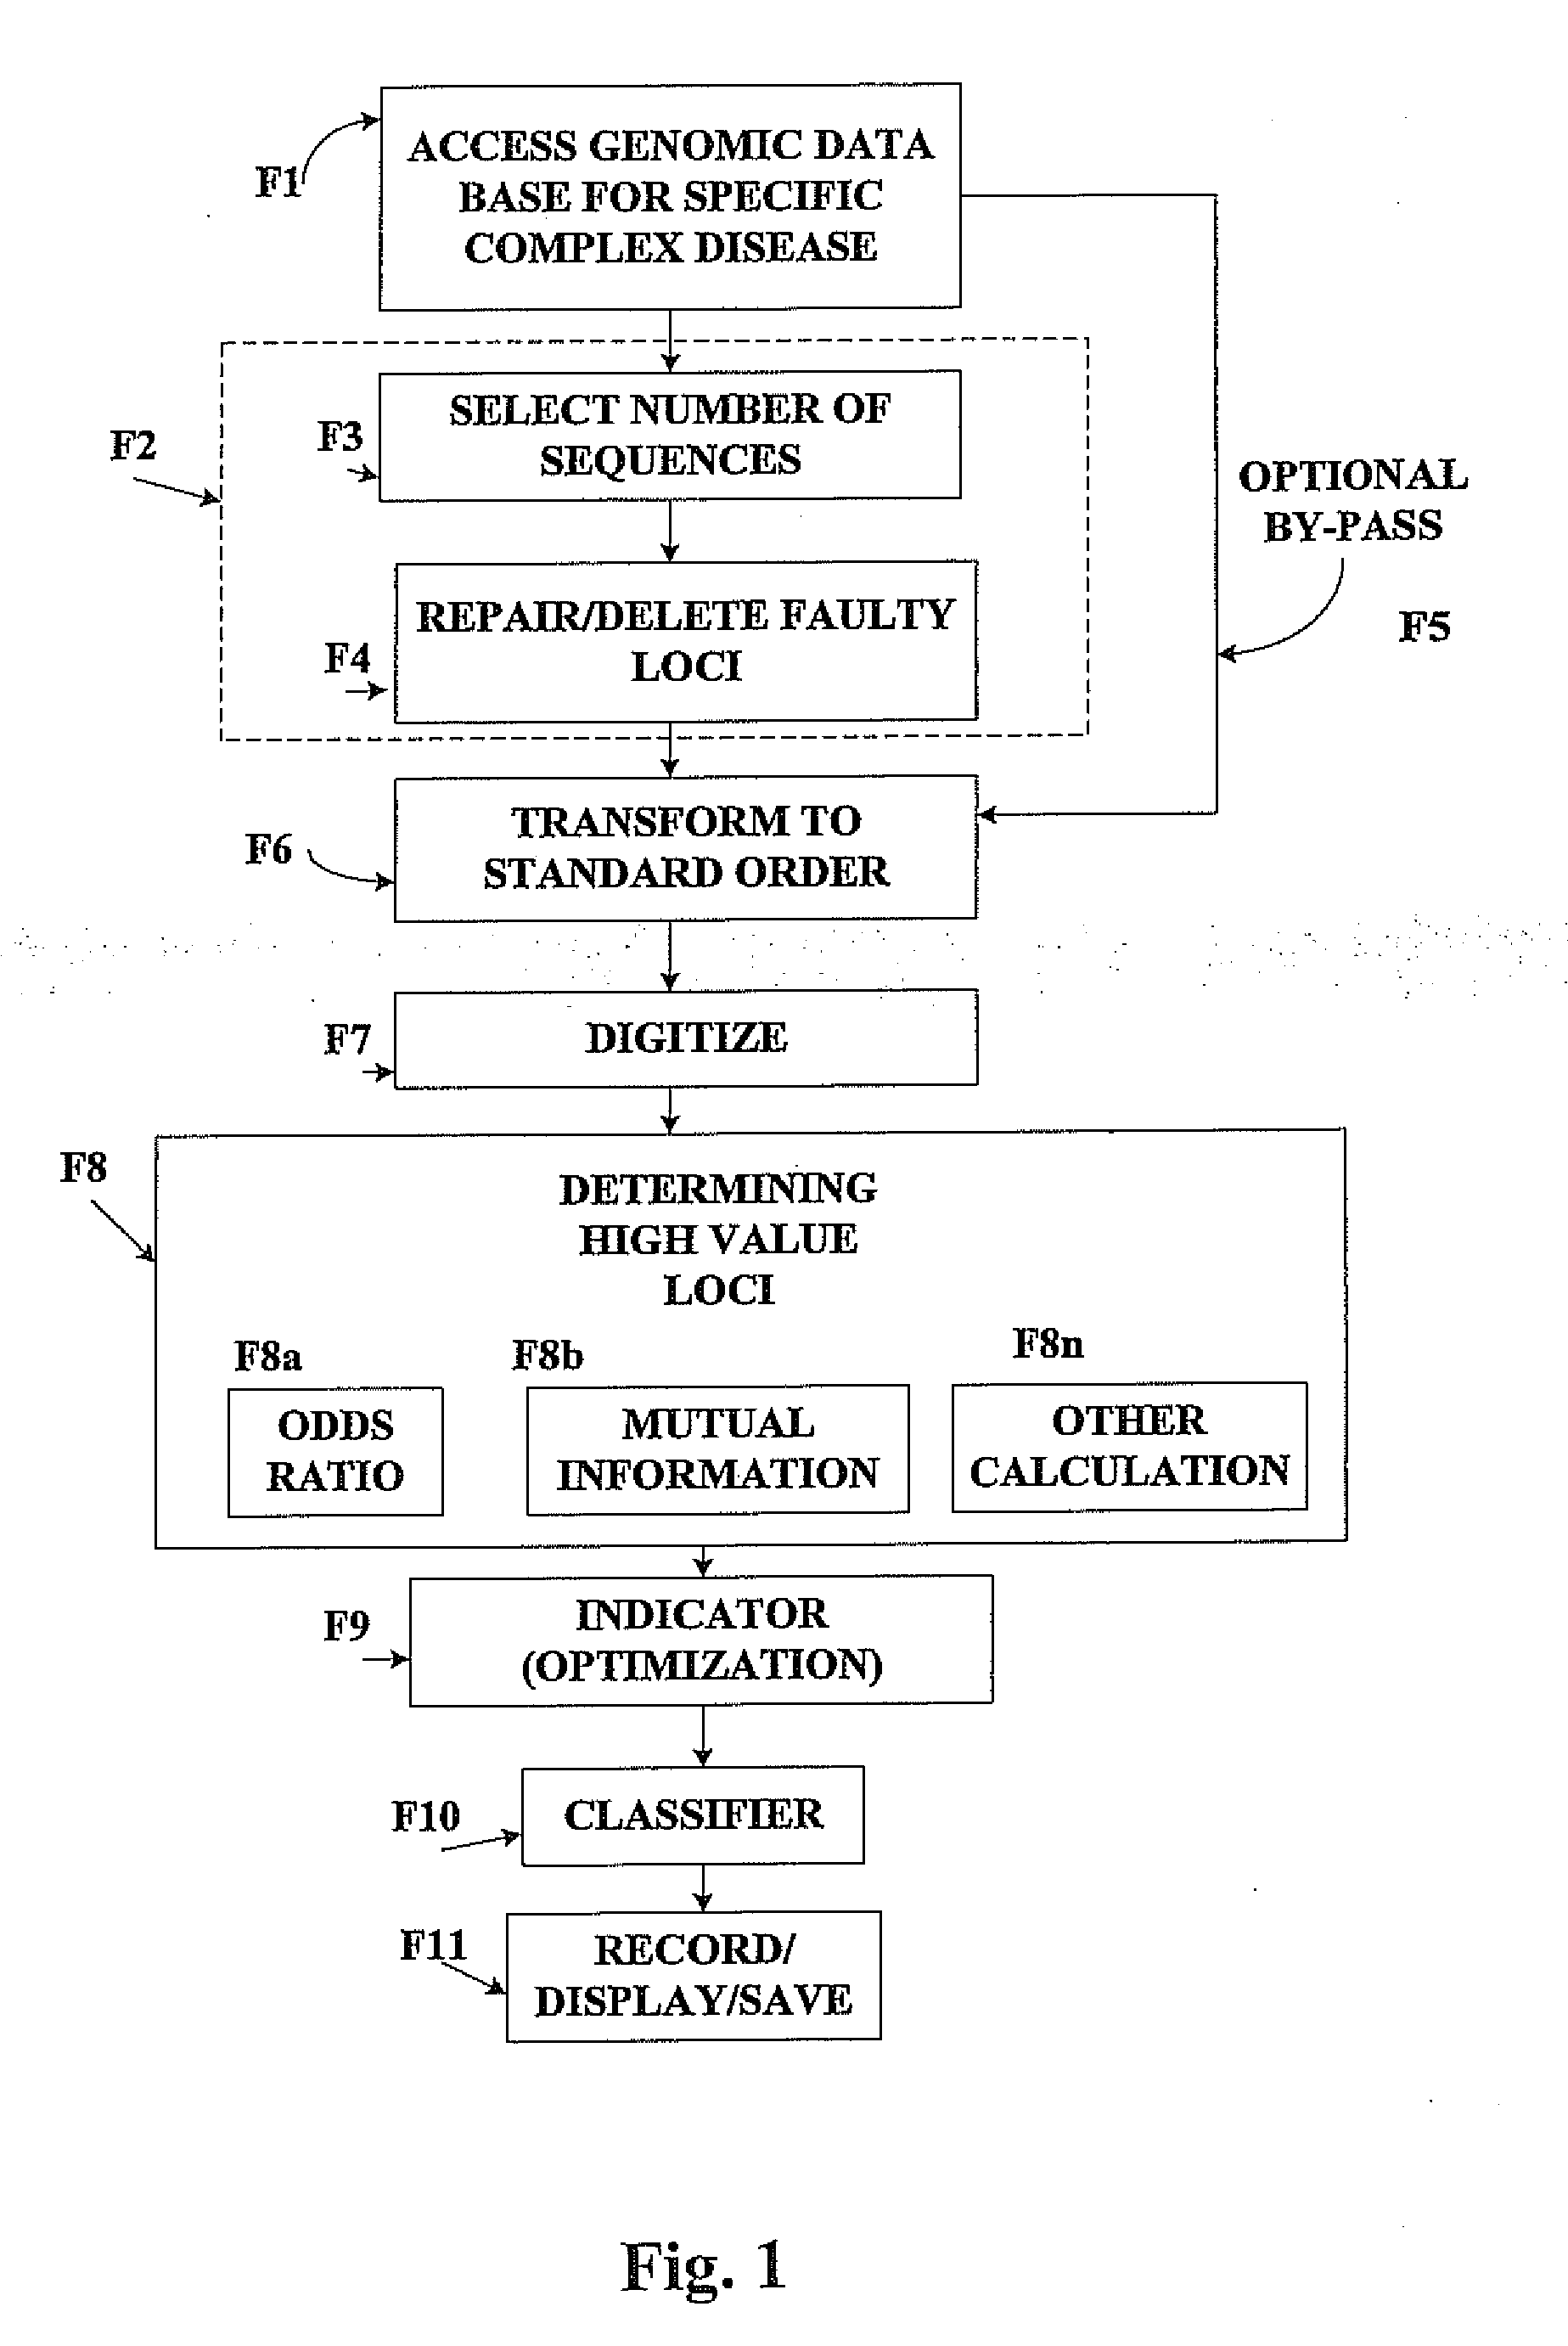 Method for identifying and employing high risk genomic markers for the prediction of specific diseases